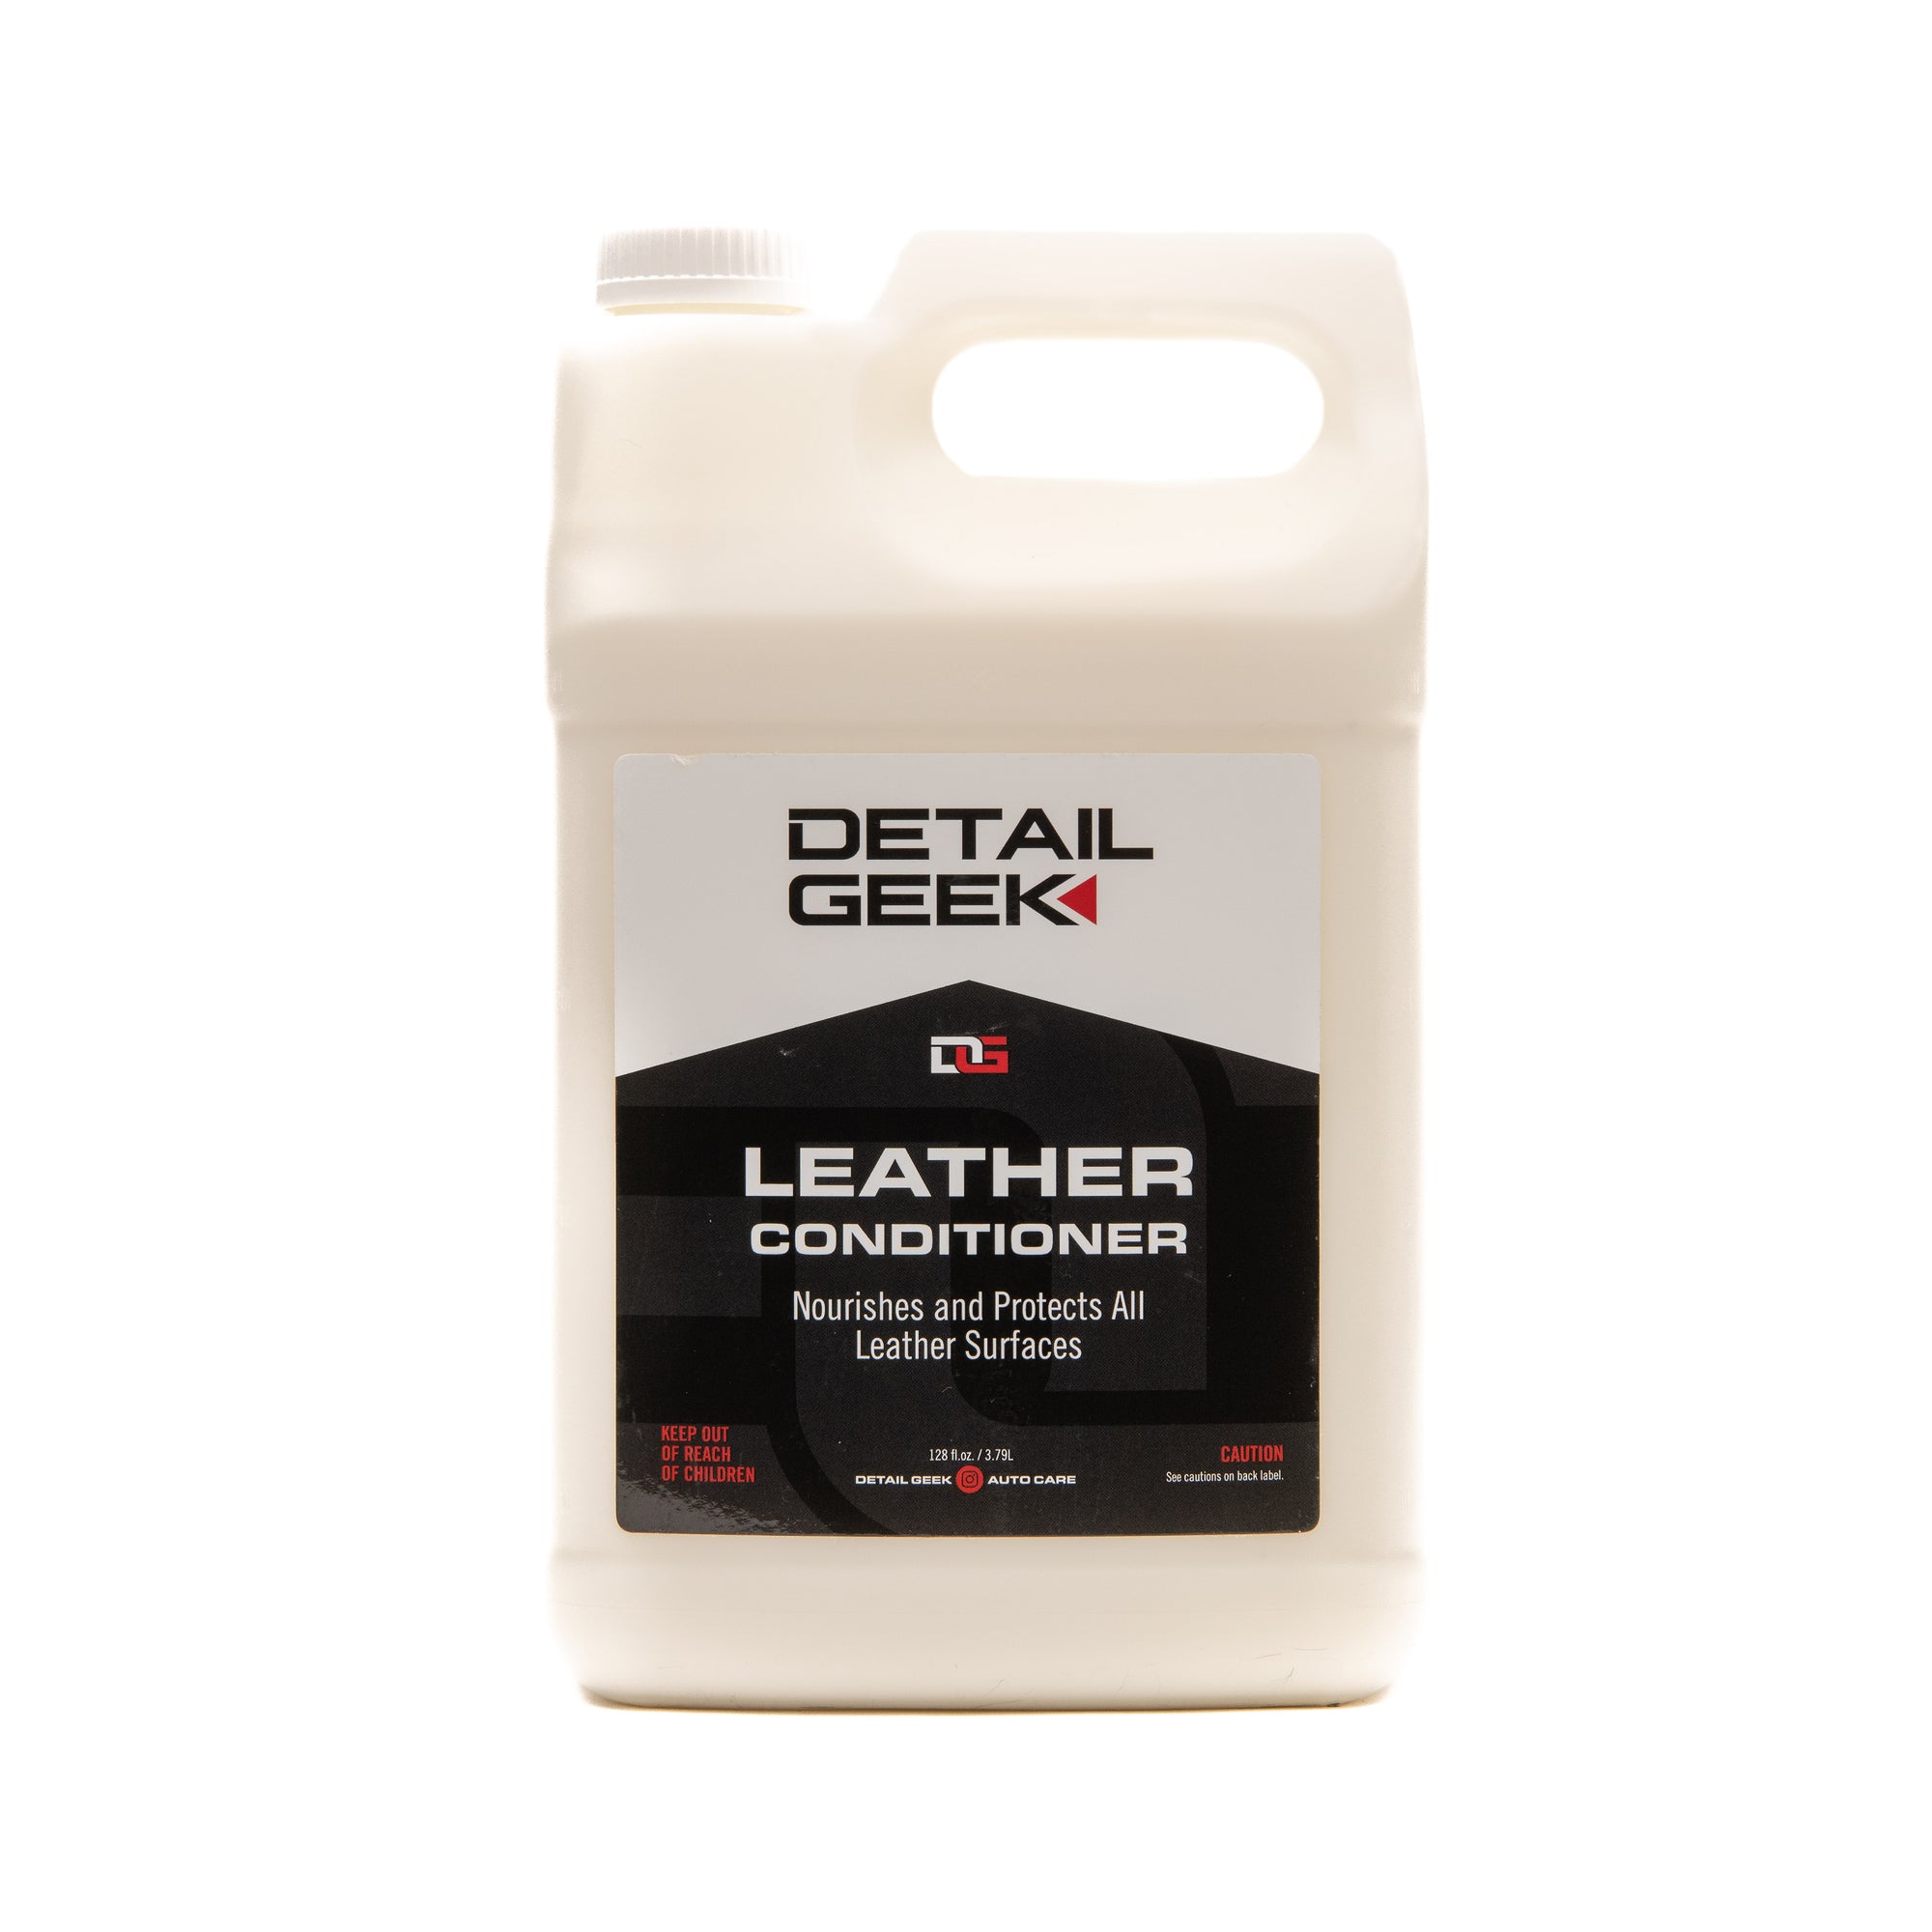 Detail Geek Leather Conditioner - GALLON